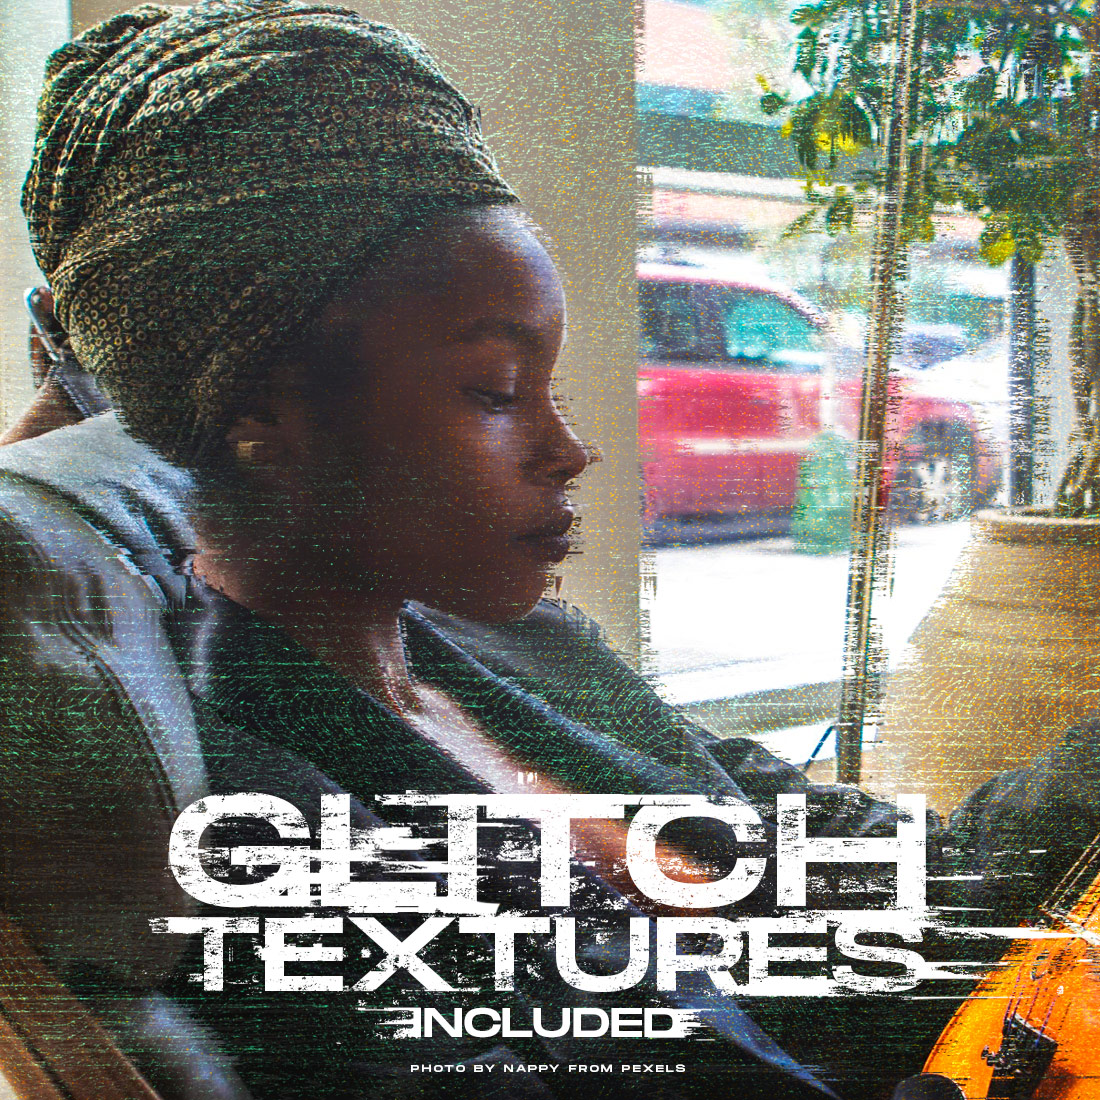 Glitch Textures Preview image.